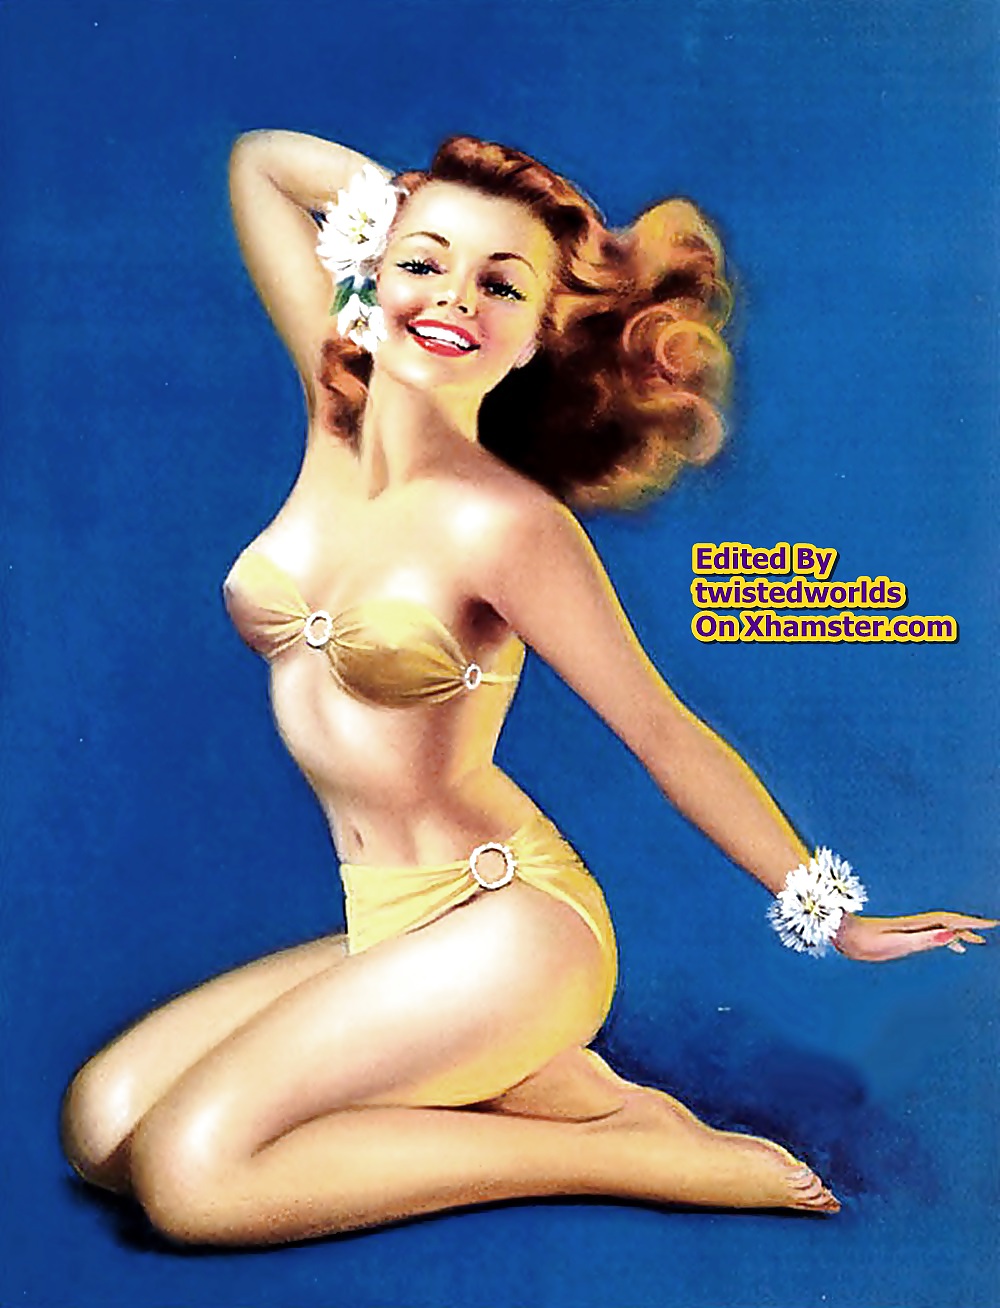 Vintage Pinup Girls New & Old Erotica By twistedworlds #16556102